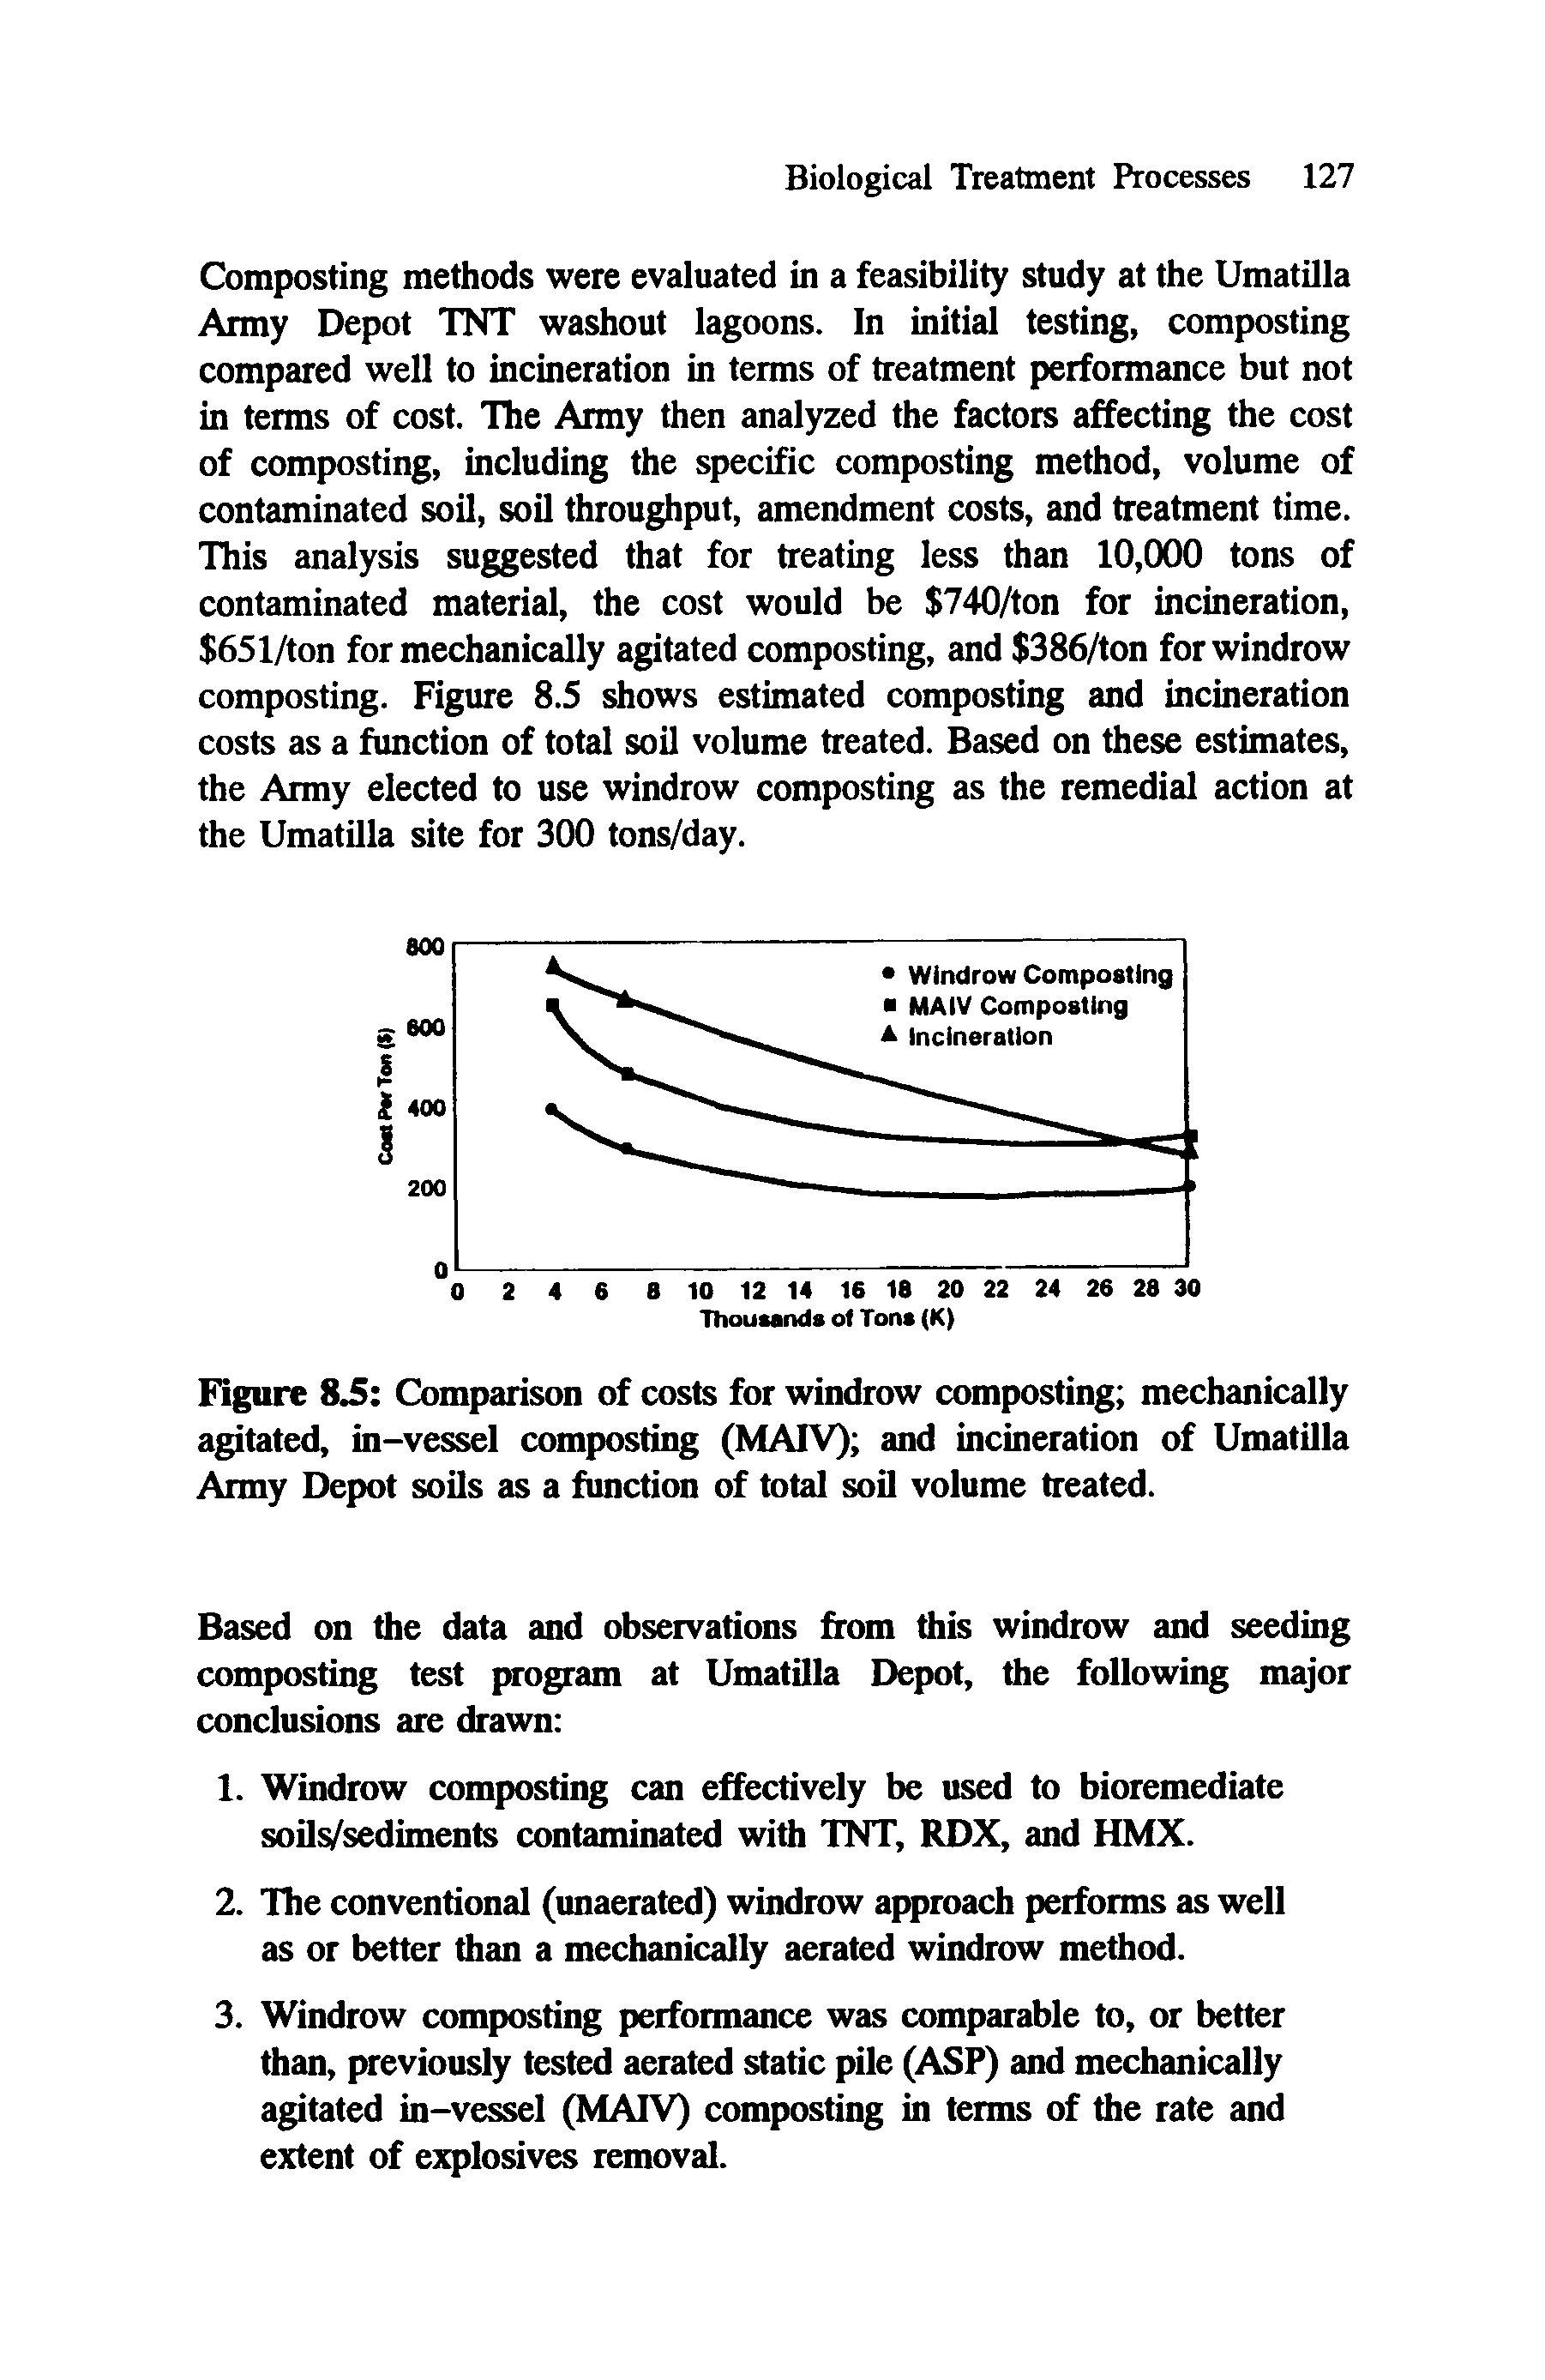 Figure 8.5 Comparison of costs for windrow composting mechanically agitated, in-vessel composting (MATV) and incineration of Umatilla Army Depot soils as a function of total soil volume treated.